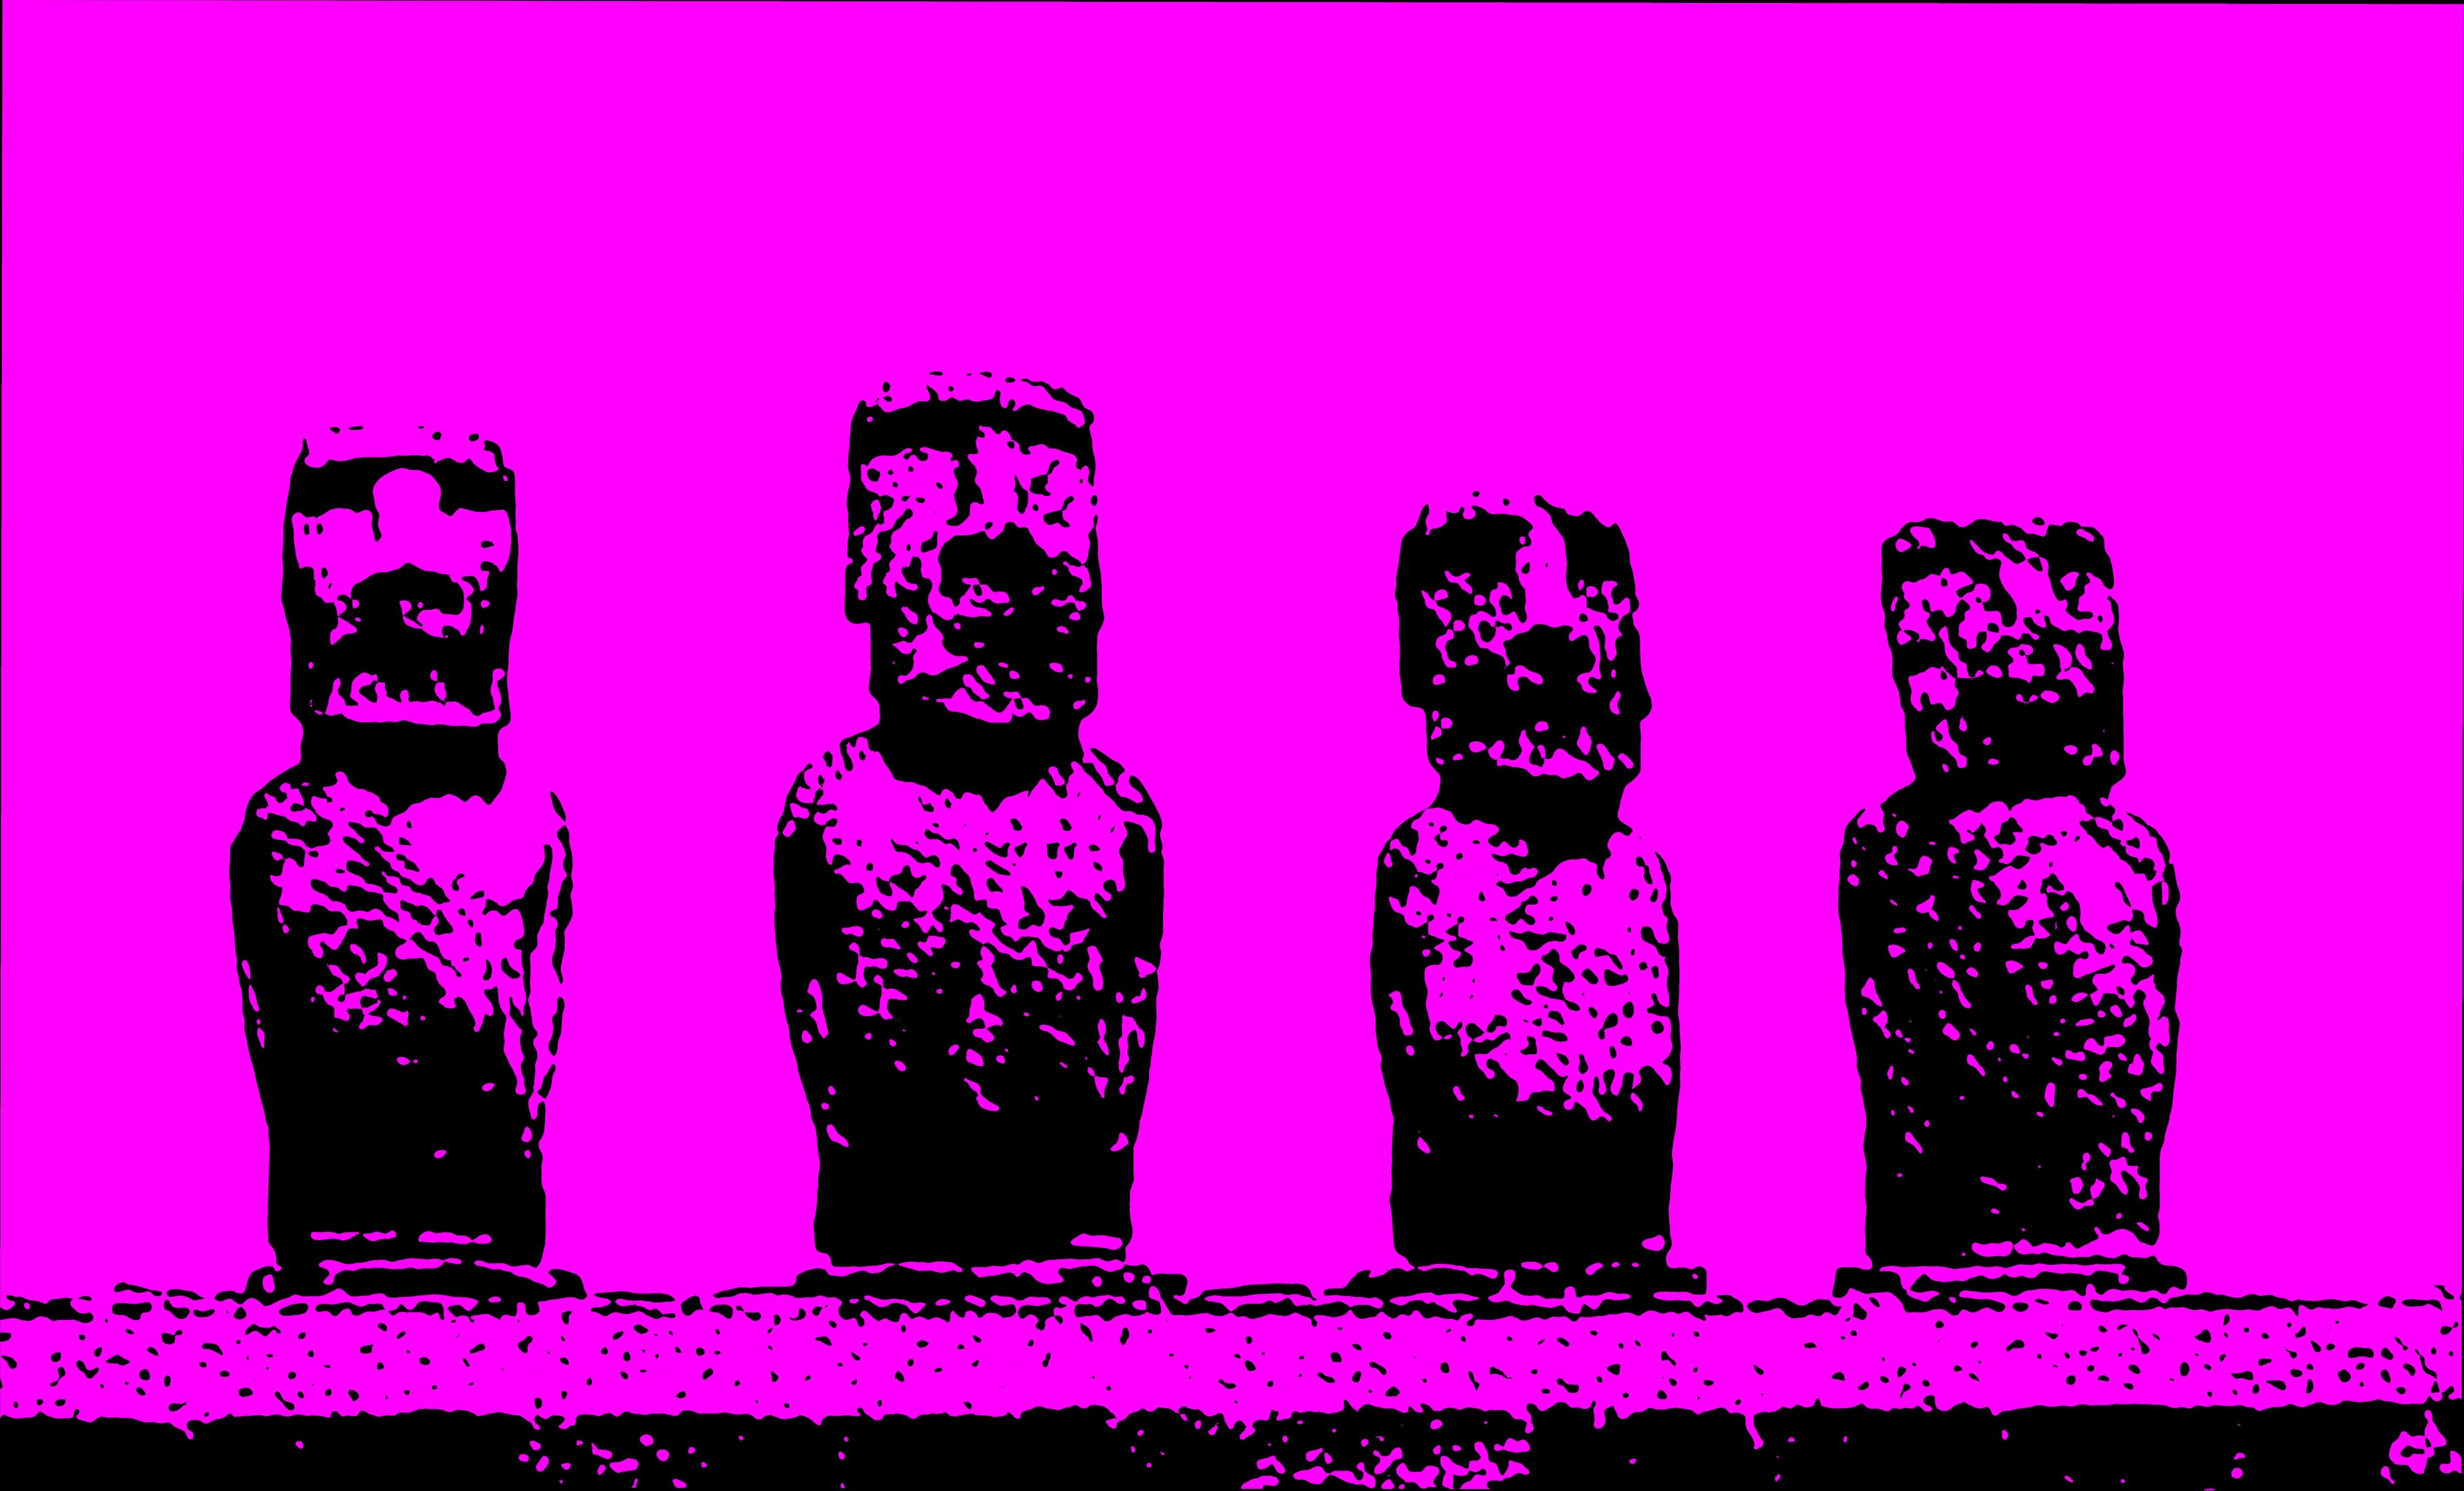 Richard Scudder, 4 Kings Easter Island - In Pink. Hand Signed And Numbered By The Artist. Multi Colored Serigraph.  

:: Hand Printed Work :: Modern :: This piece comes with an official certificate of authenticity signed by the artist :: Ready to